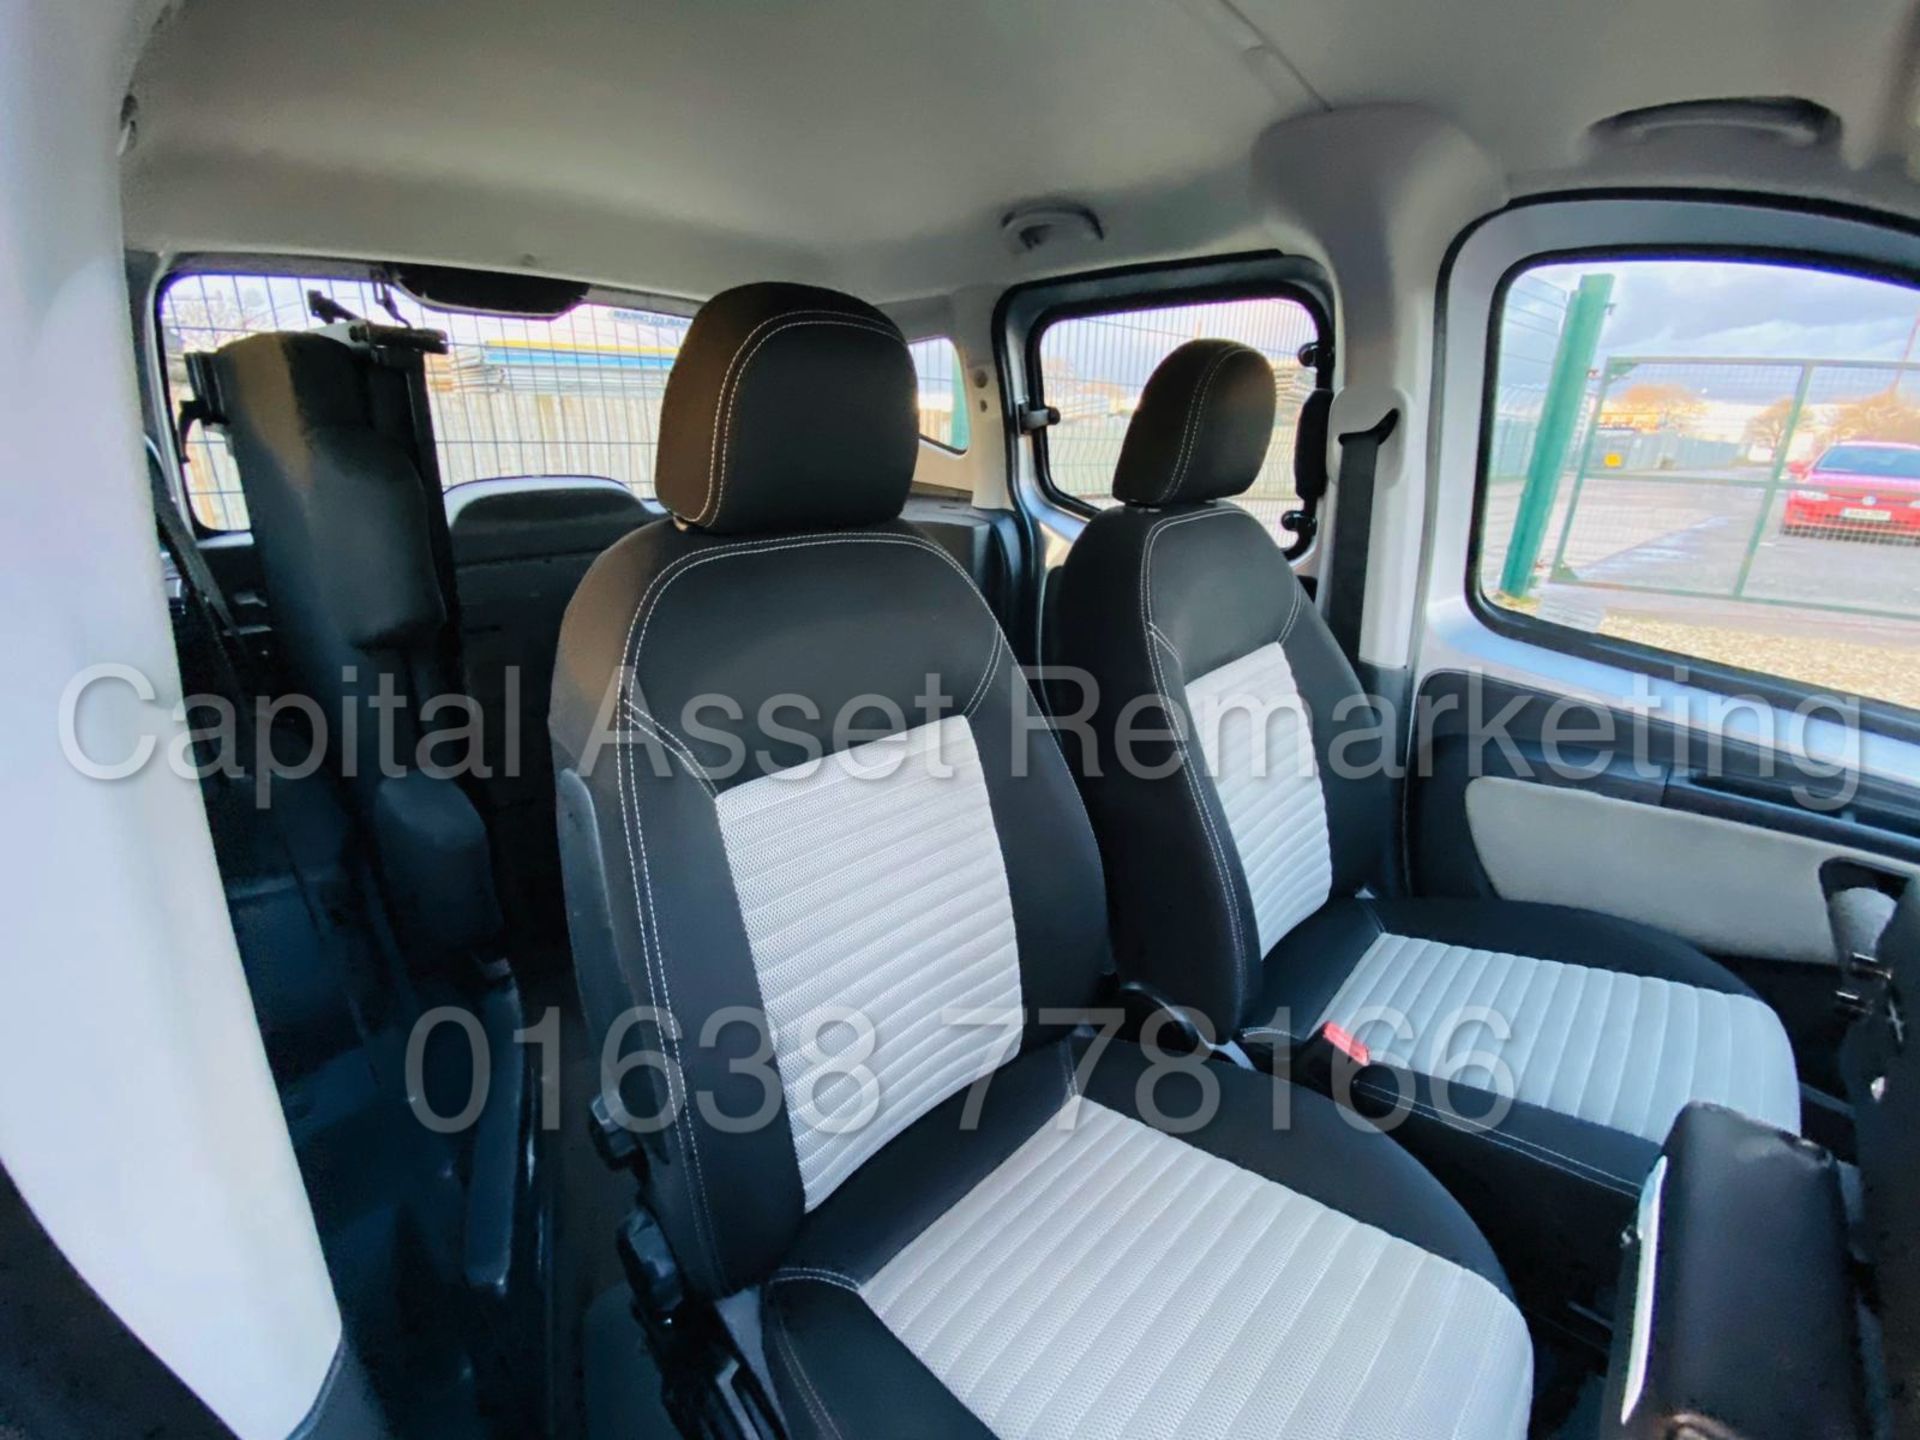 ON SALE FIAT QUBO *DYNAMIC* (2012 MODEL) 'AUTO* (WHEEL CHAIR ACCESSIBLE VEHICLE) *ONLY 12K MILES* - Image 14 of 24